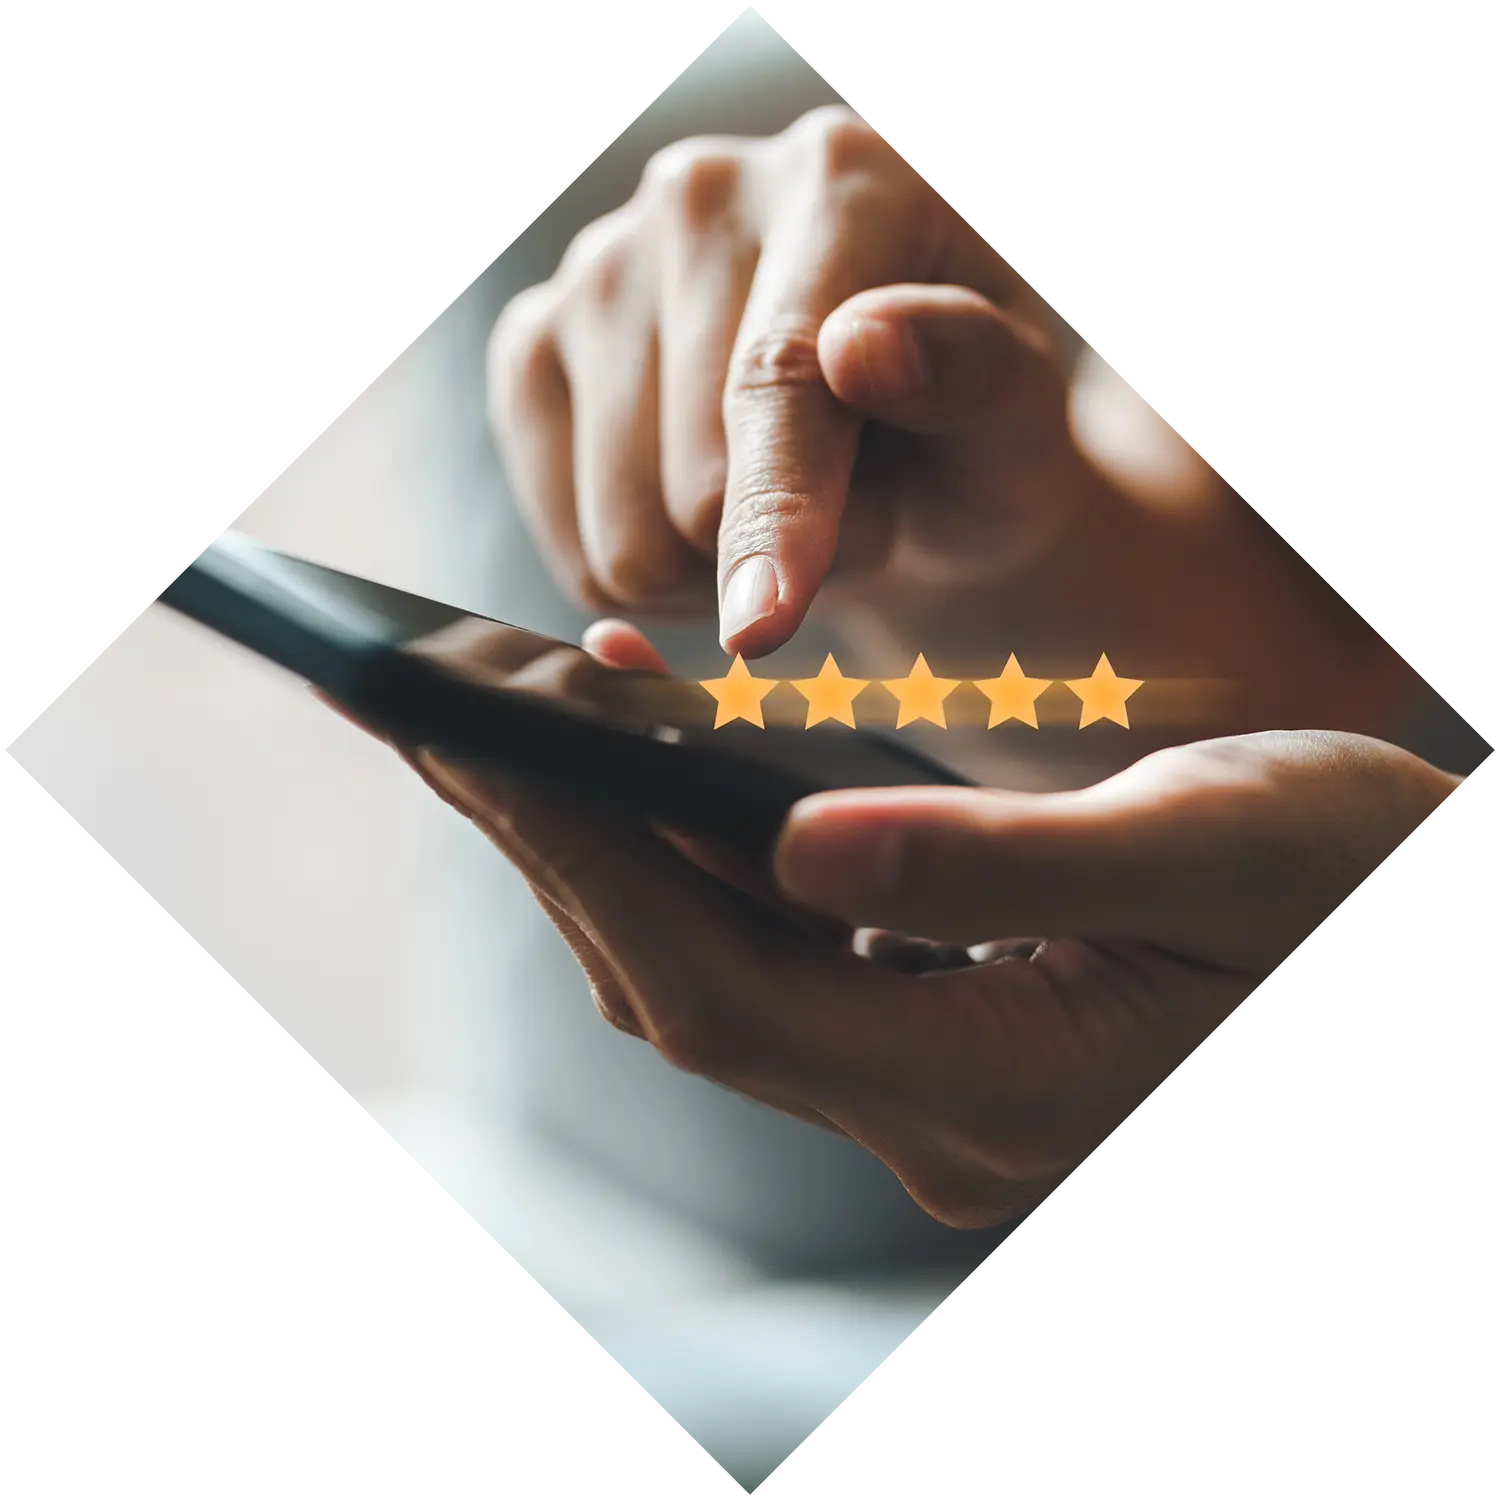 Image of Hands Giving a 5 Star Review on Cell Phone Representing Lifetime Value of a Customer